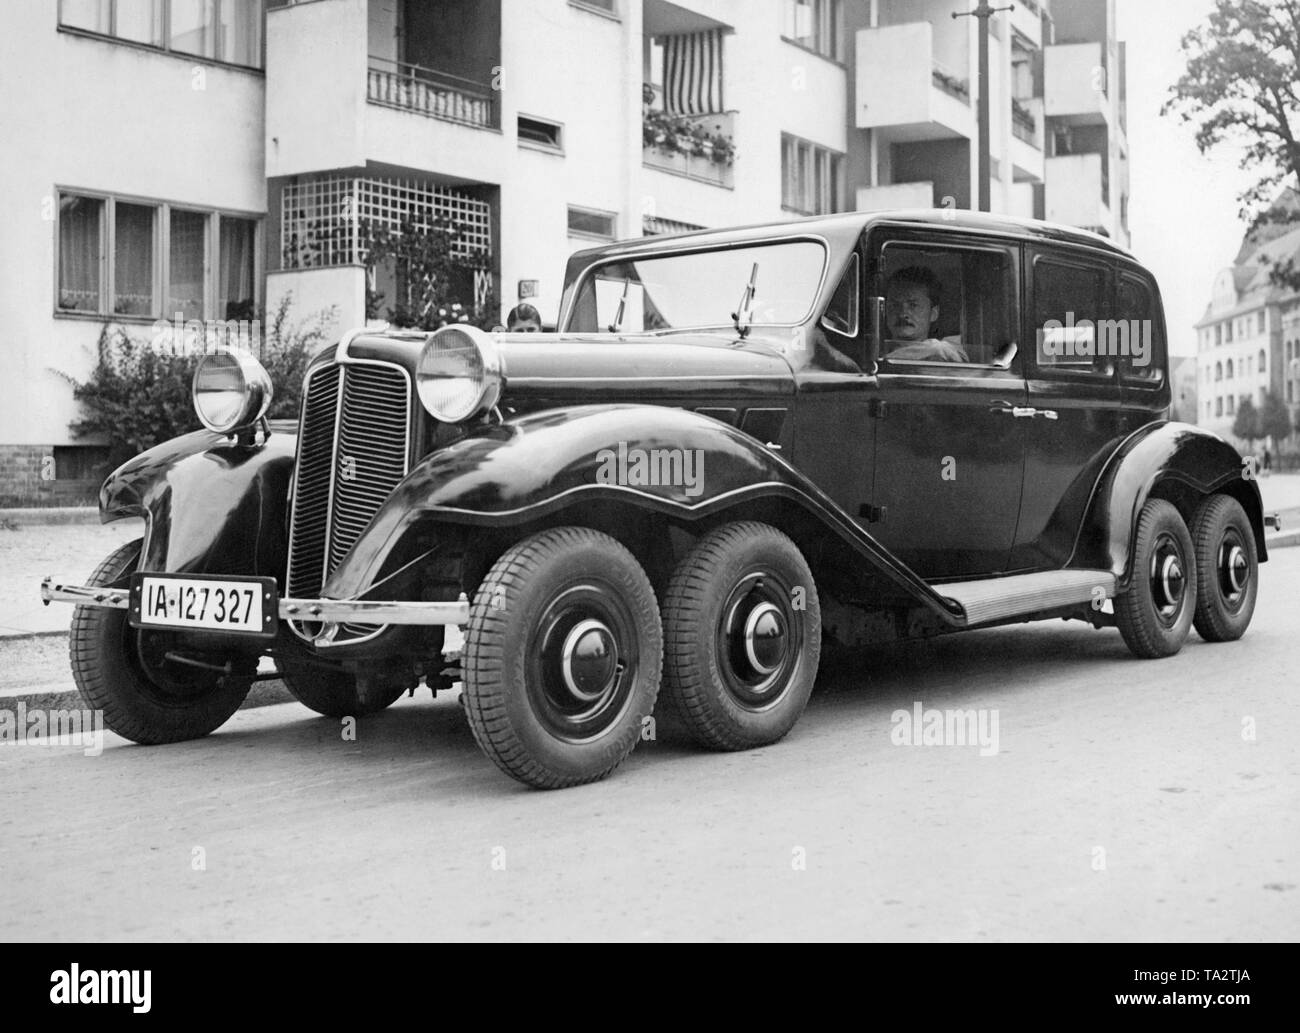 A car with extended wheelbase, four axles and eight wheels, designed by the Berlin engineer Rimmek. Stock Photo